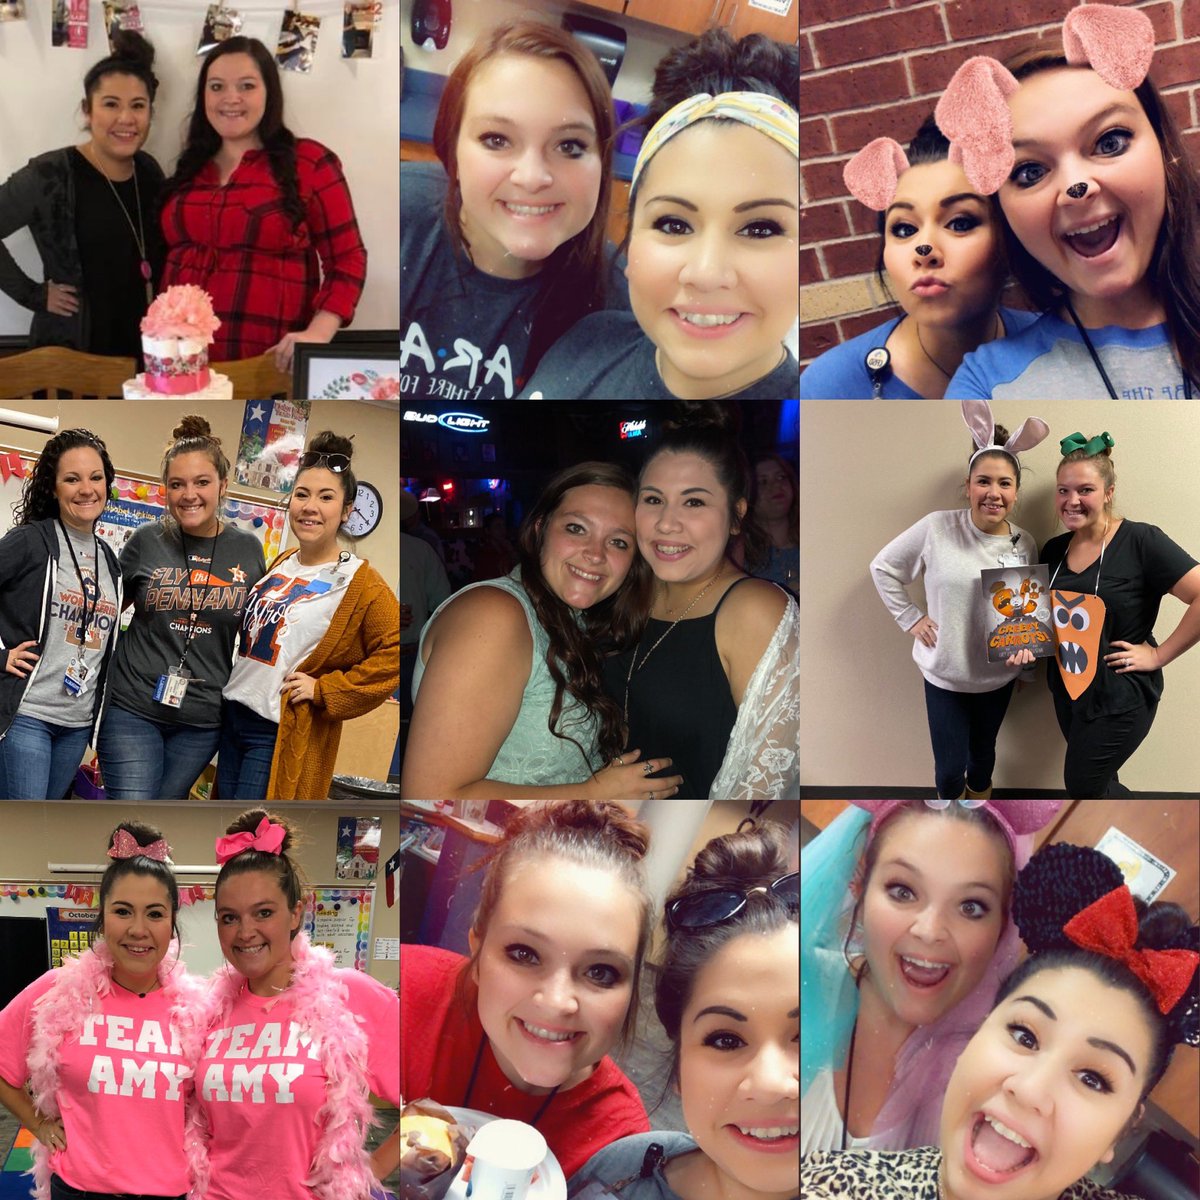 Happy birthday to my para partner/best friend!! So thankful for our friendship! This year is going to be the best year yet👰🏻 I hope you have an amazing day bestie!! Love you🎉💗😘 @Proud_para #proudparas #HappyBirthday